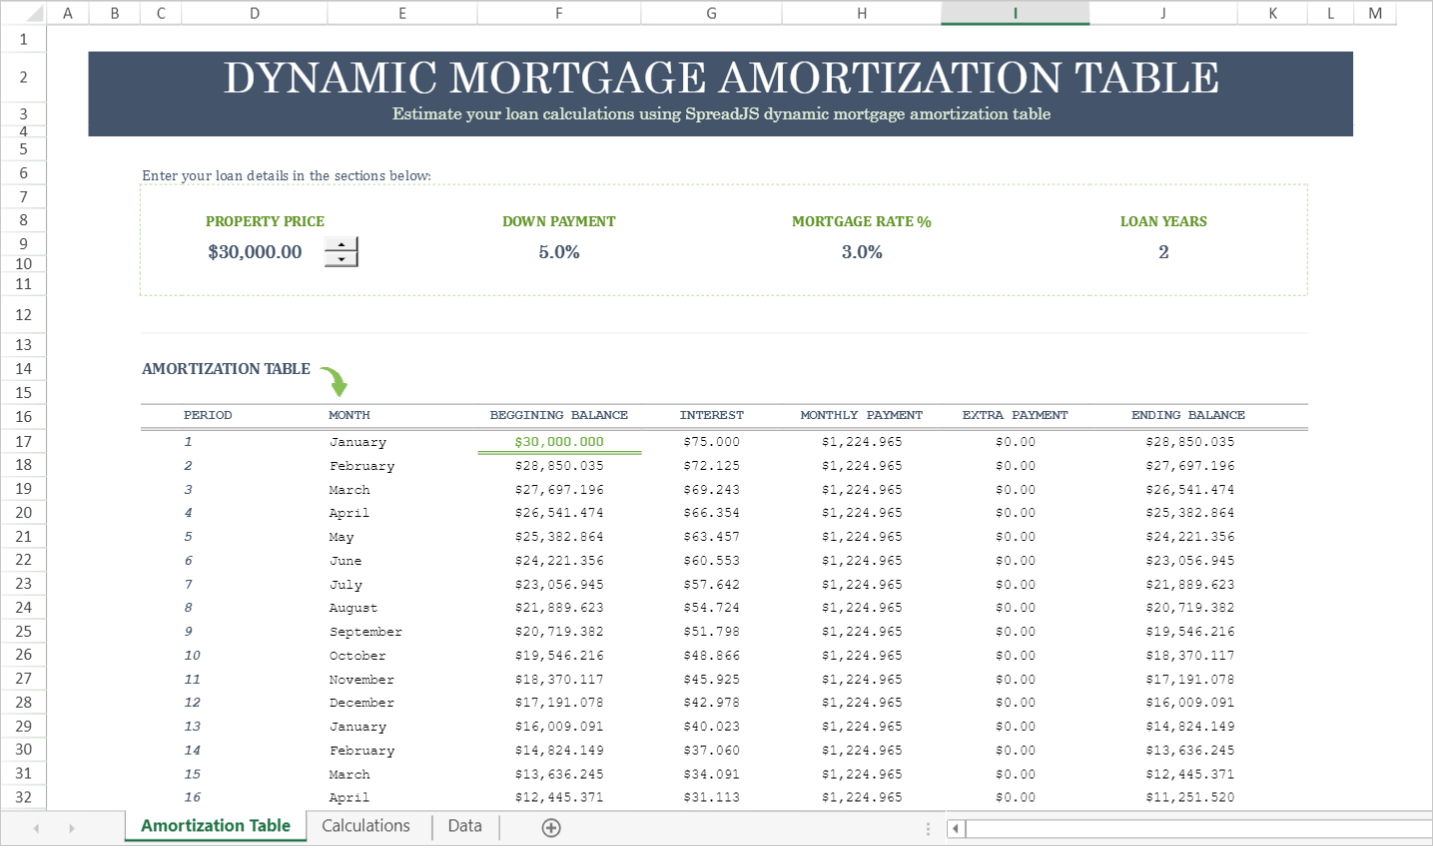 Dynamic Mortgage Amortization Table